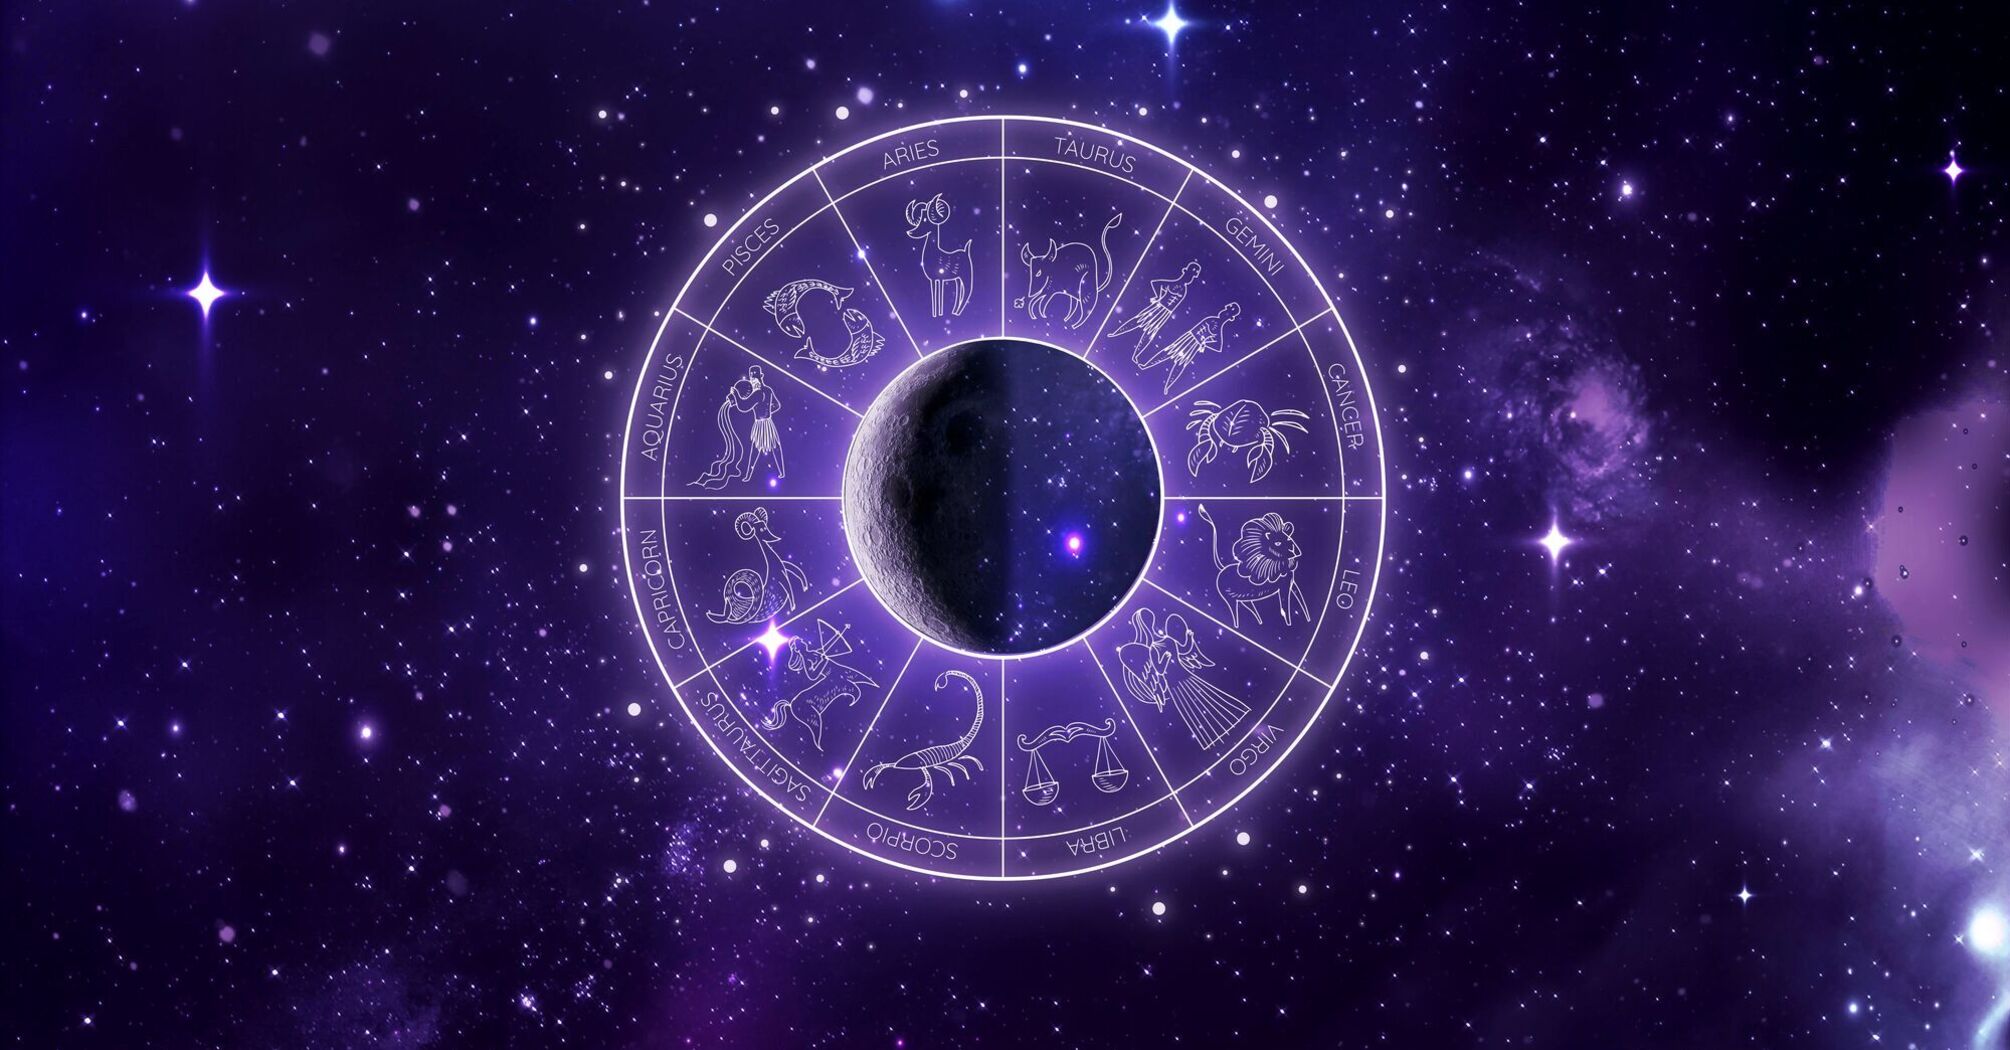 Mysterious messages await each zodiac sign: horoscope for February 24